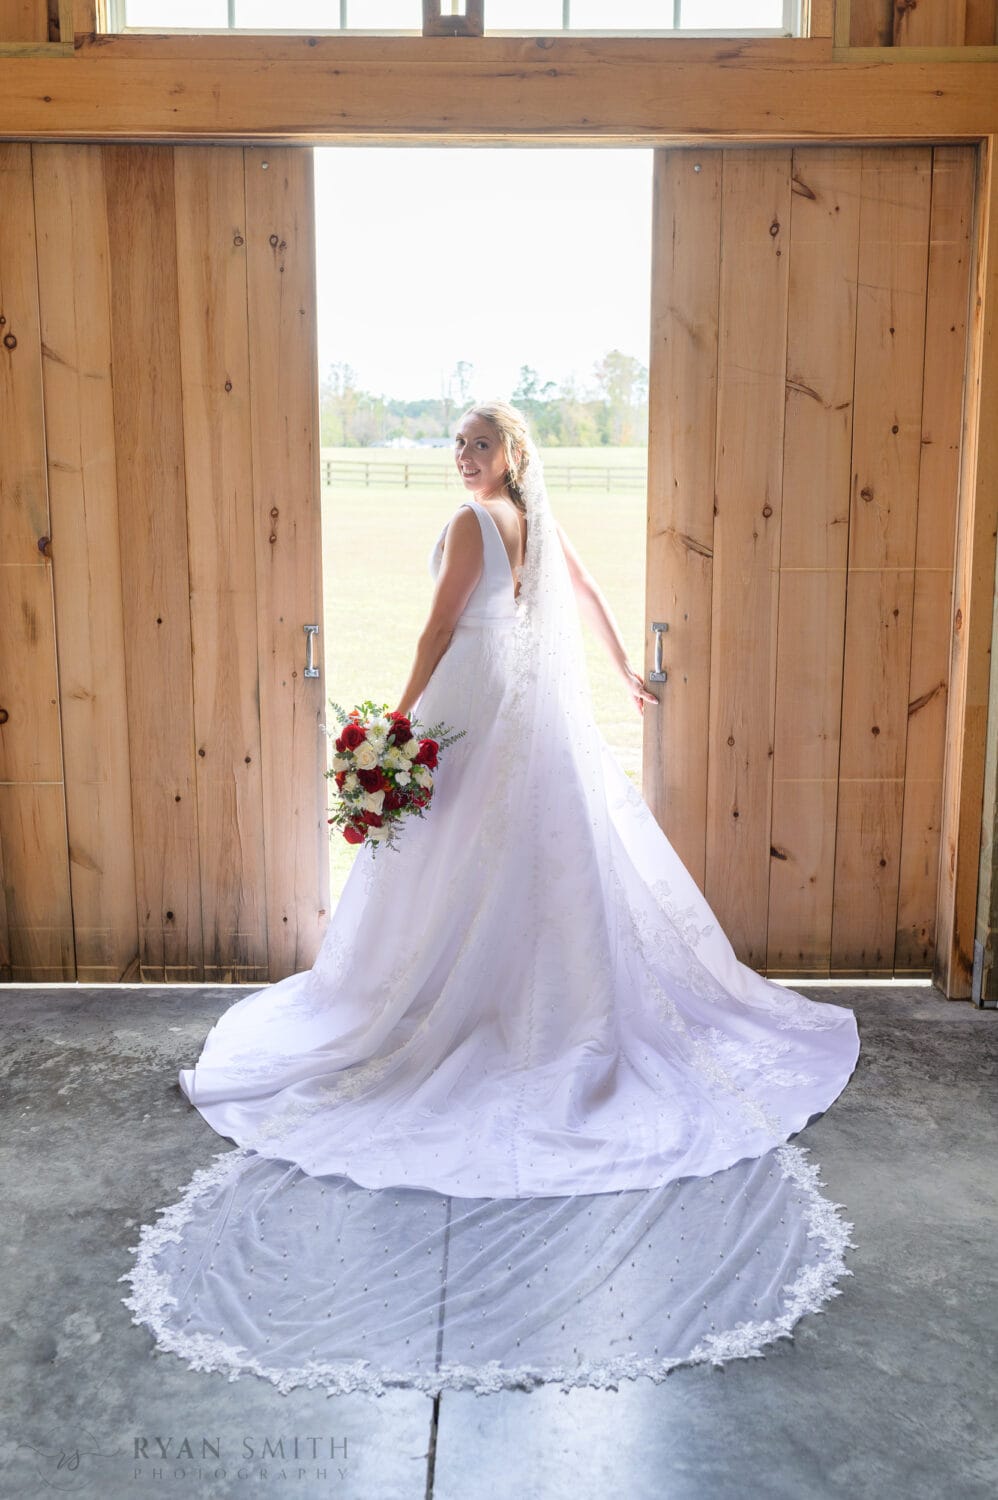 Bride standing in the light coming through the barn doors - The Blessed Barn